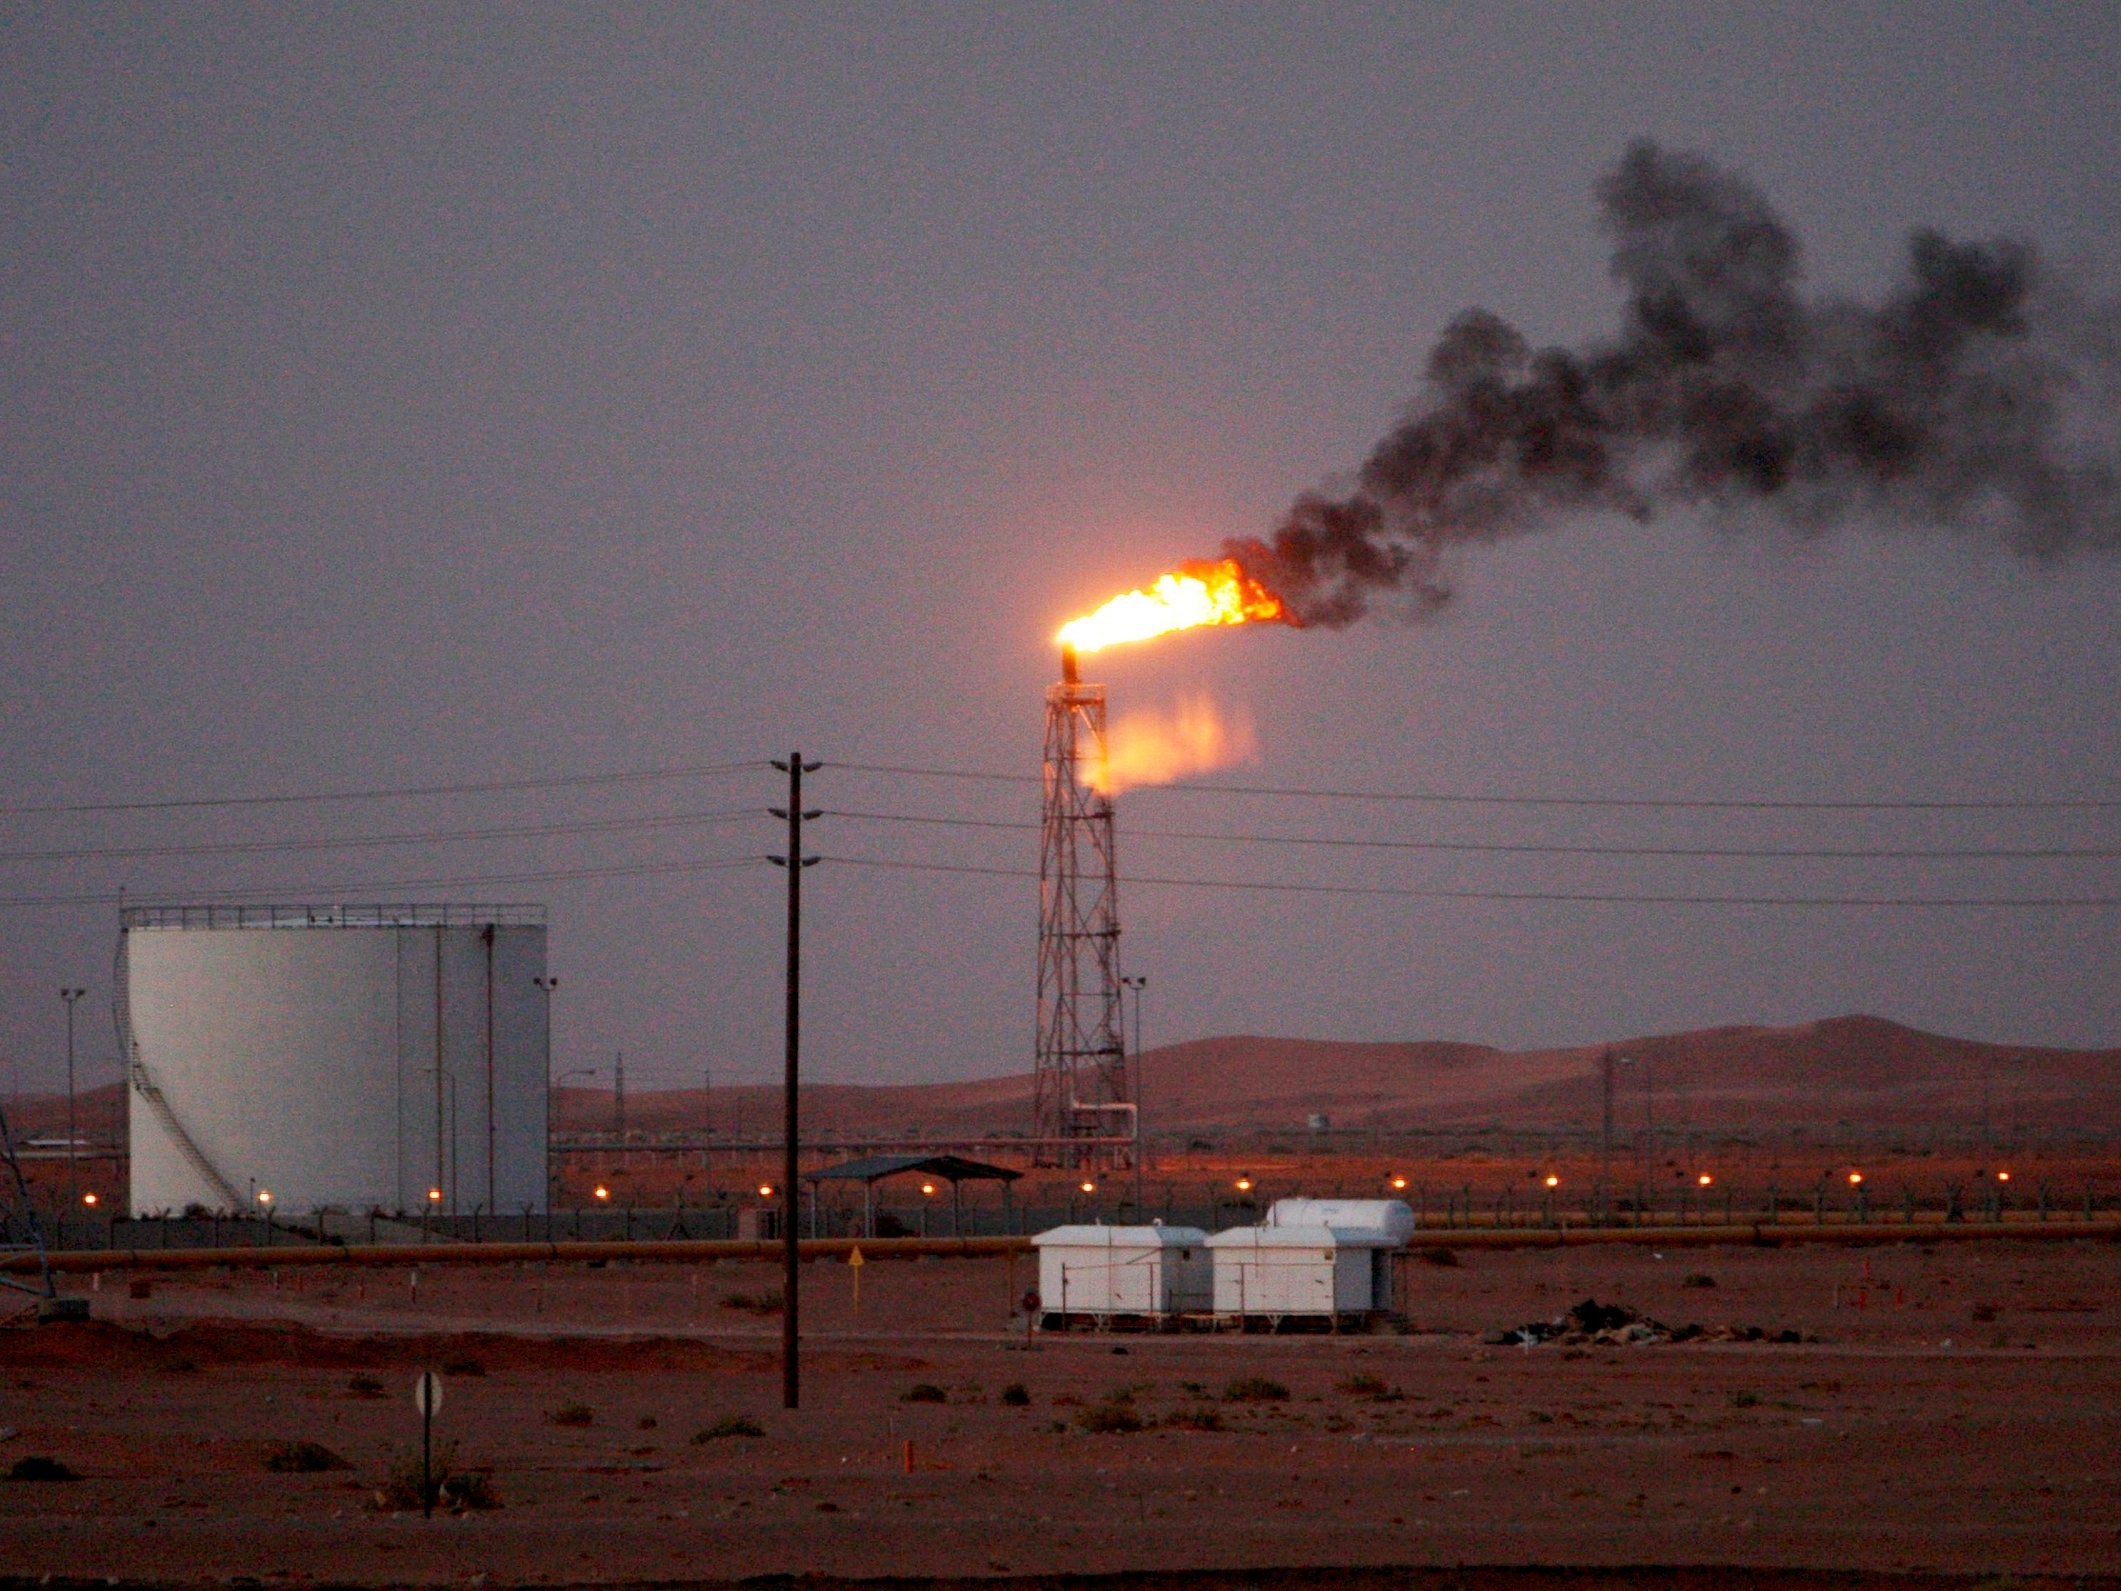 Saudi Aramco said some of its oil infrastructure in Saudi Arabia's eastern province has been attacked, including one of its petroleum pumping stations